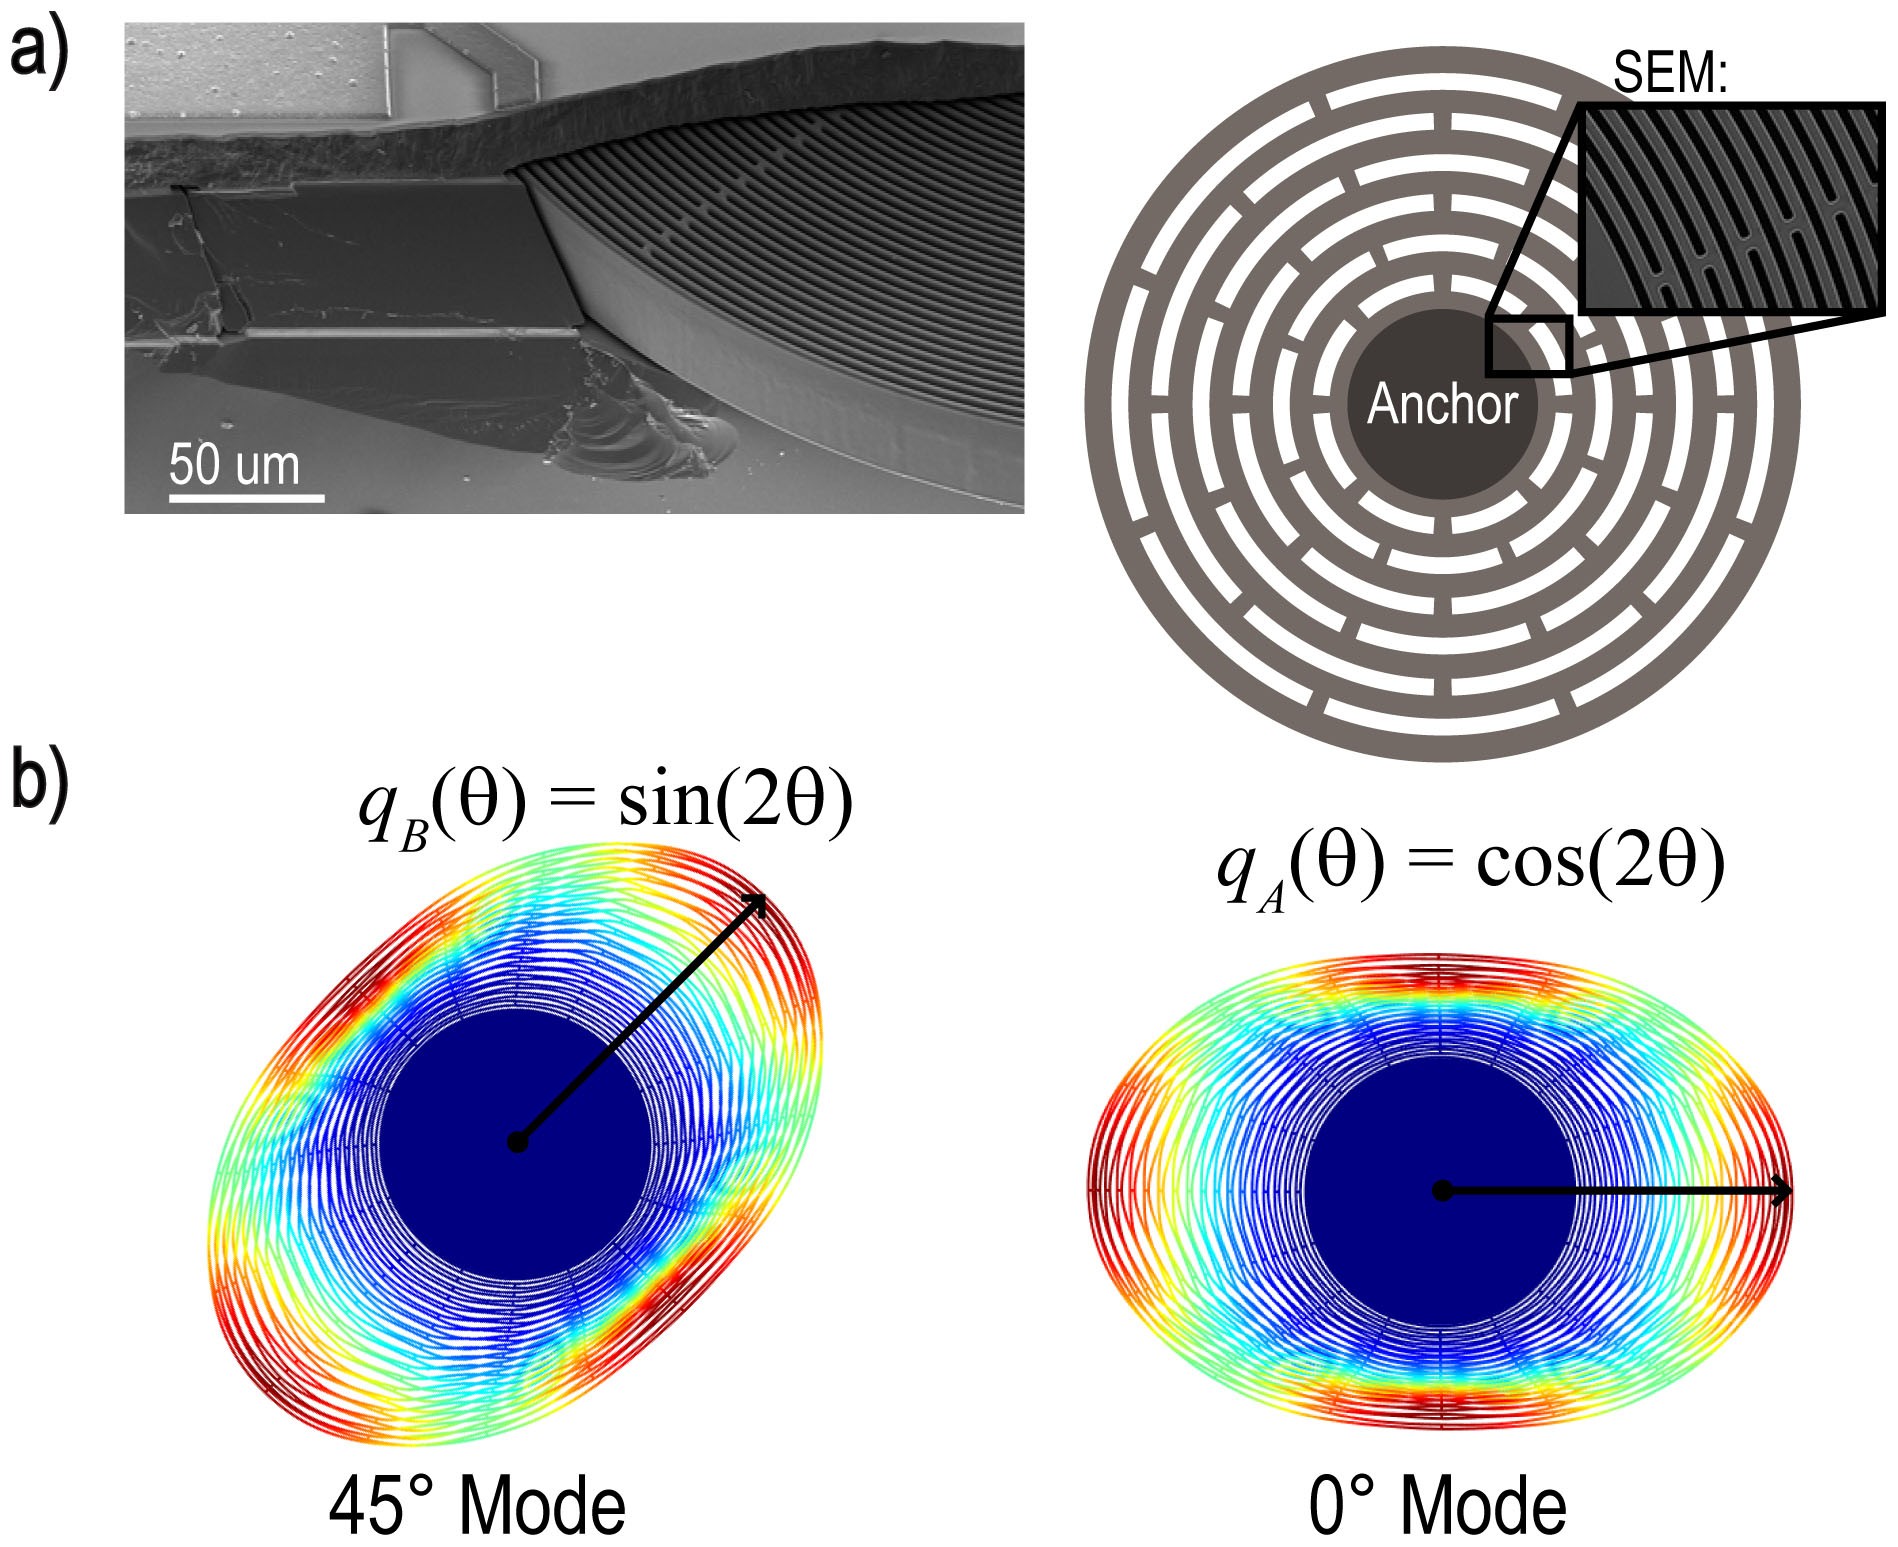 Self-induced parametric amplification arising from nonlinear elastic  coupling in a micromechanical resonating disk gyroscope | Scientific Reports